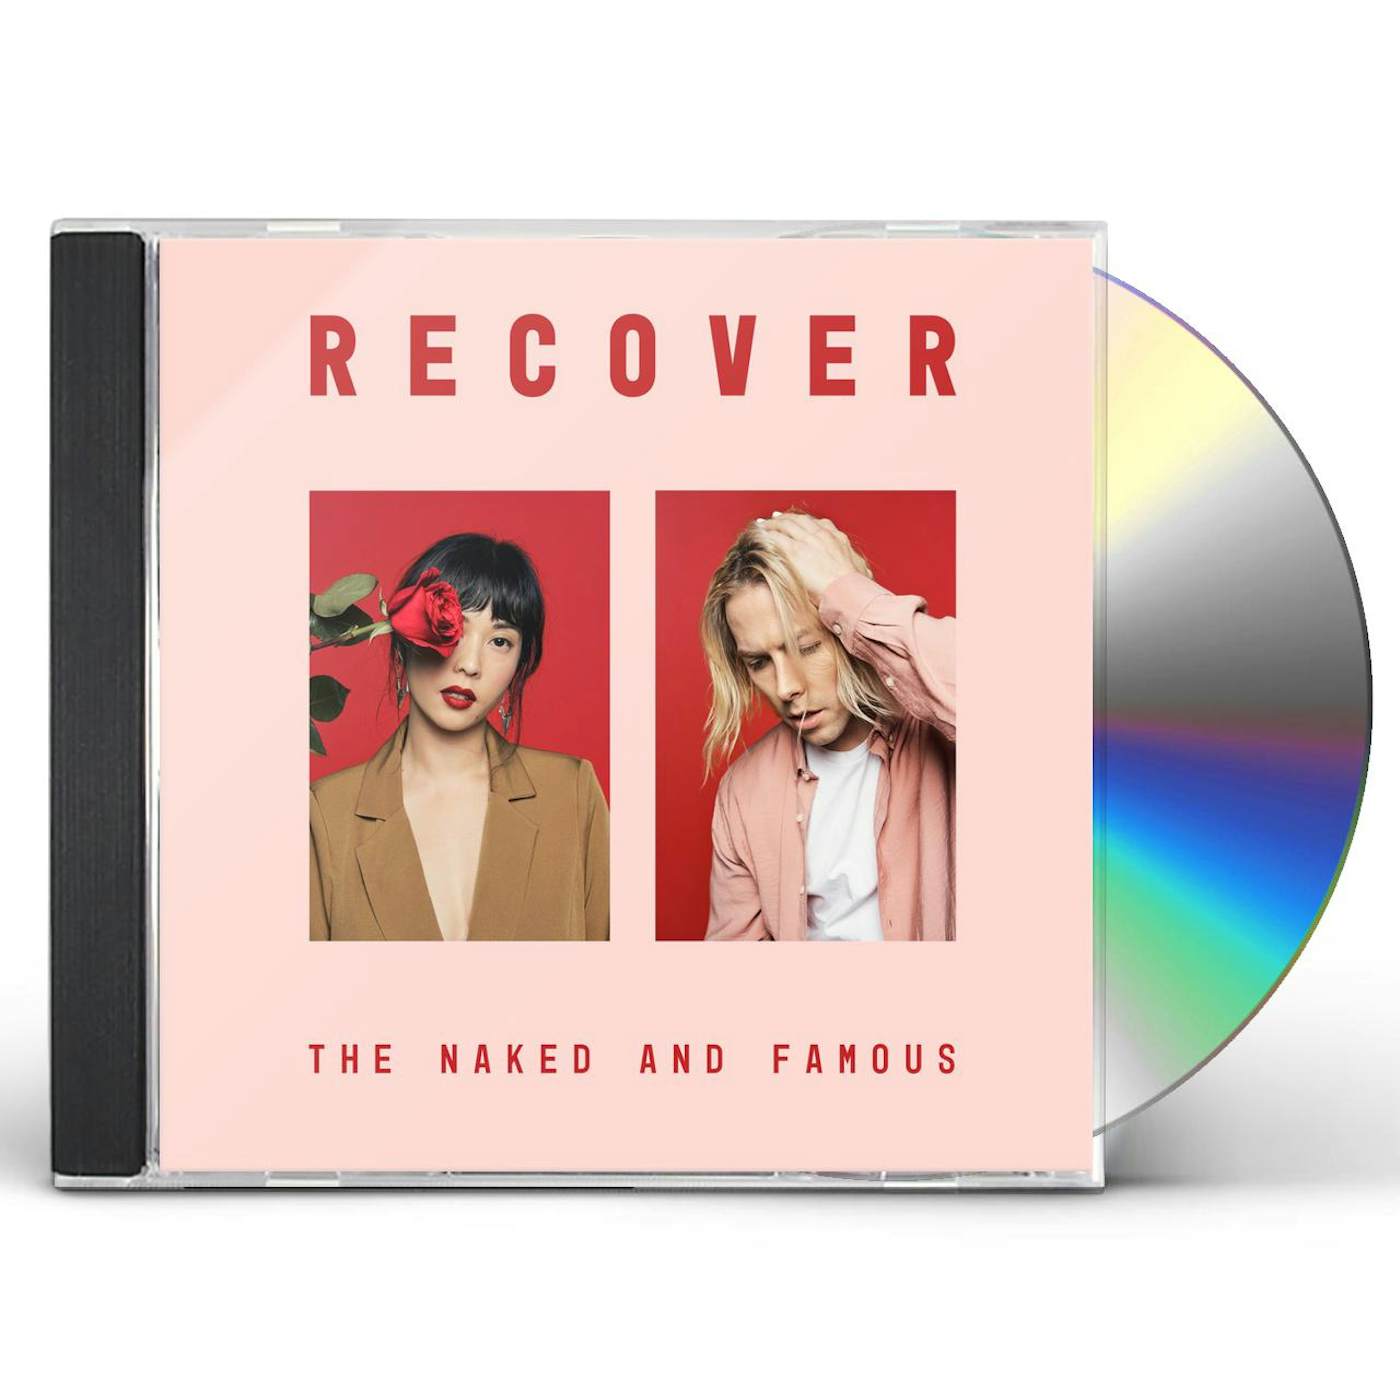 The Naked And Famous Recover CD